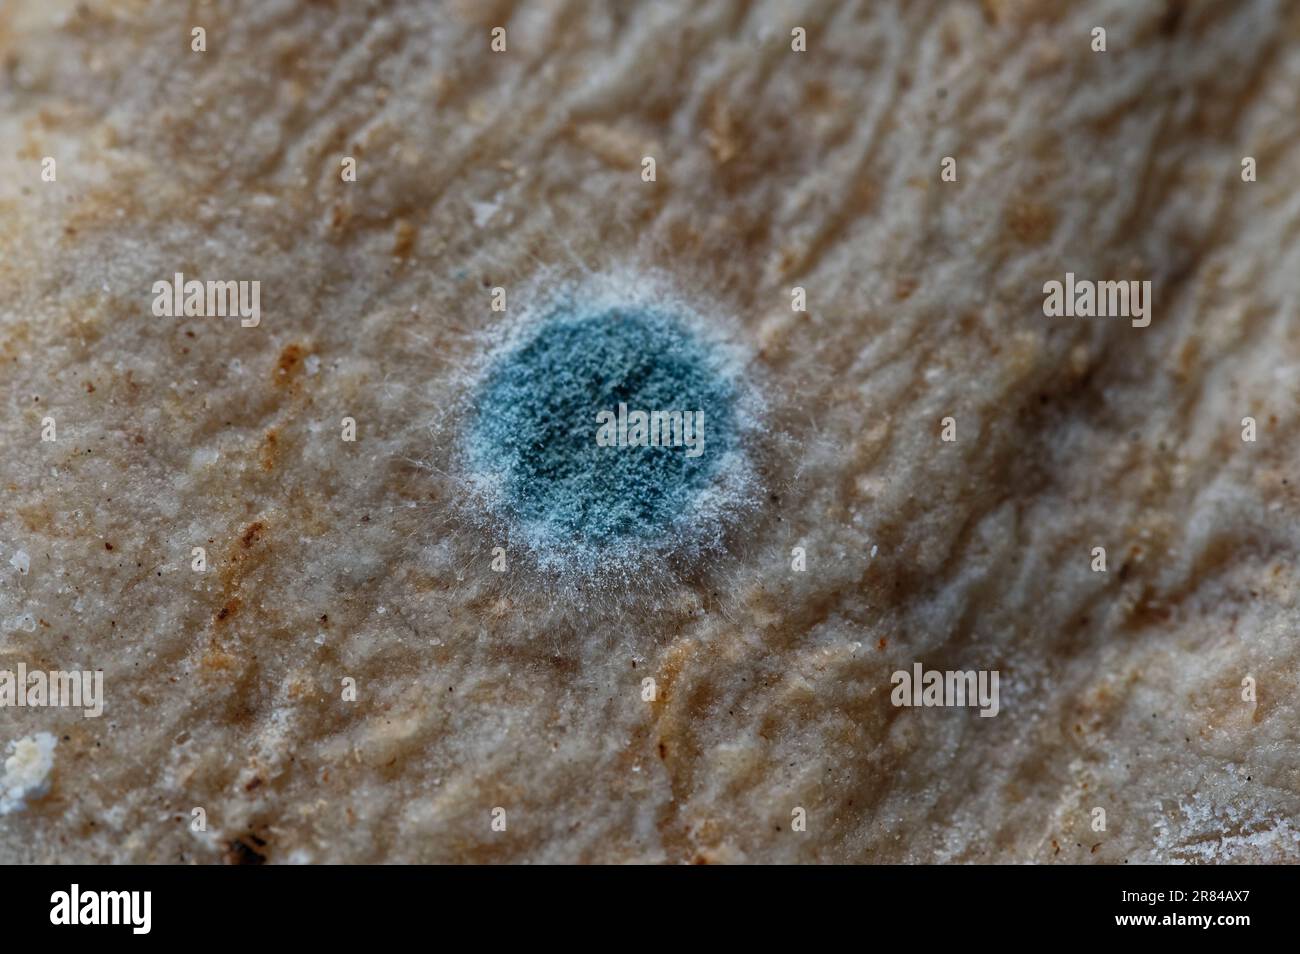 fuzzy parts of mold you see on bread are colonies of spores Stock Photo